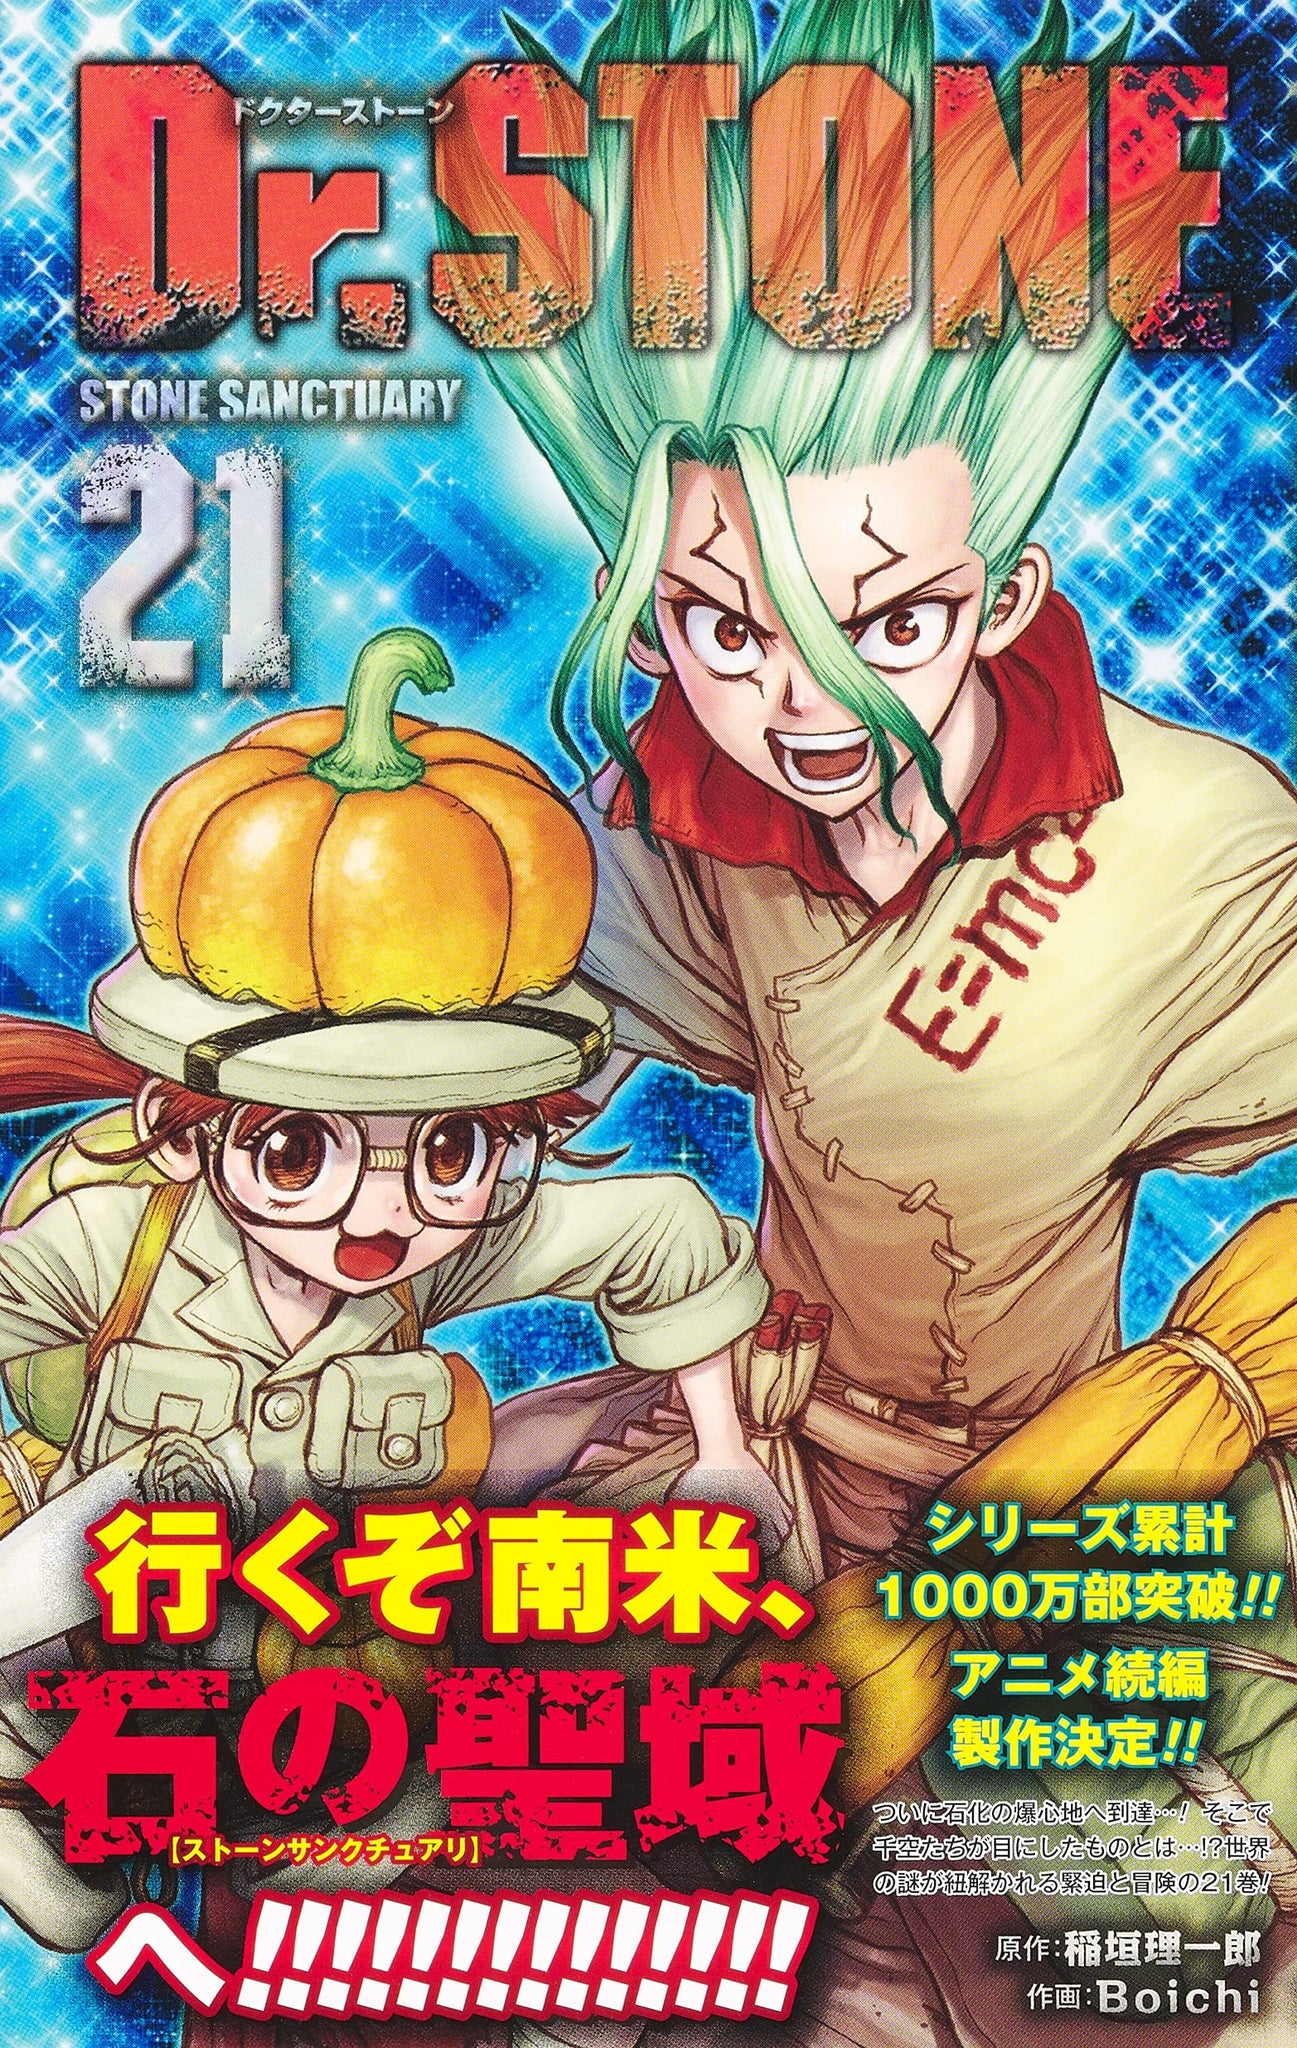 Dr Stone 21 Japanese Book Store